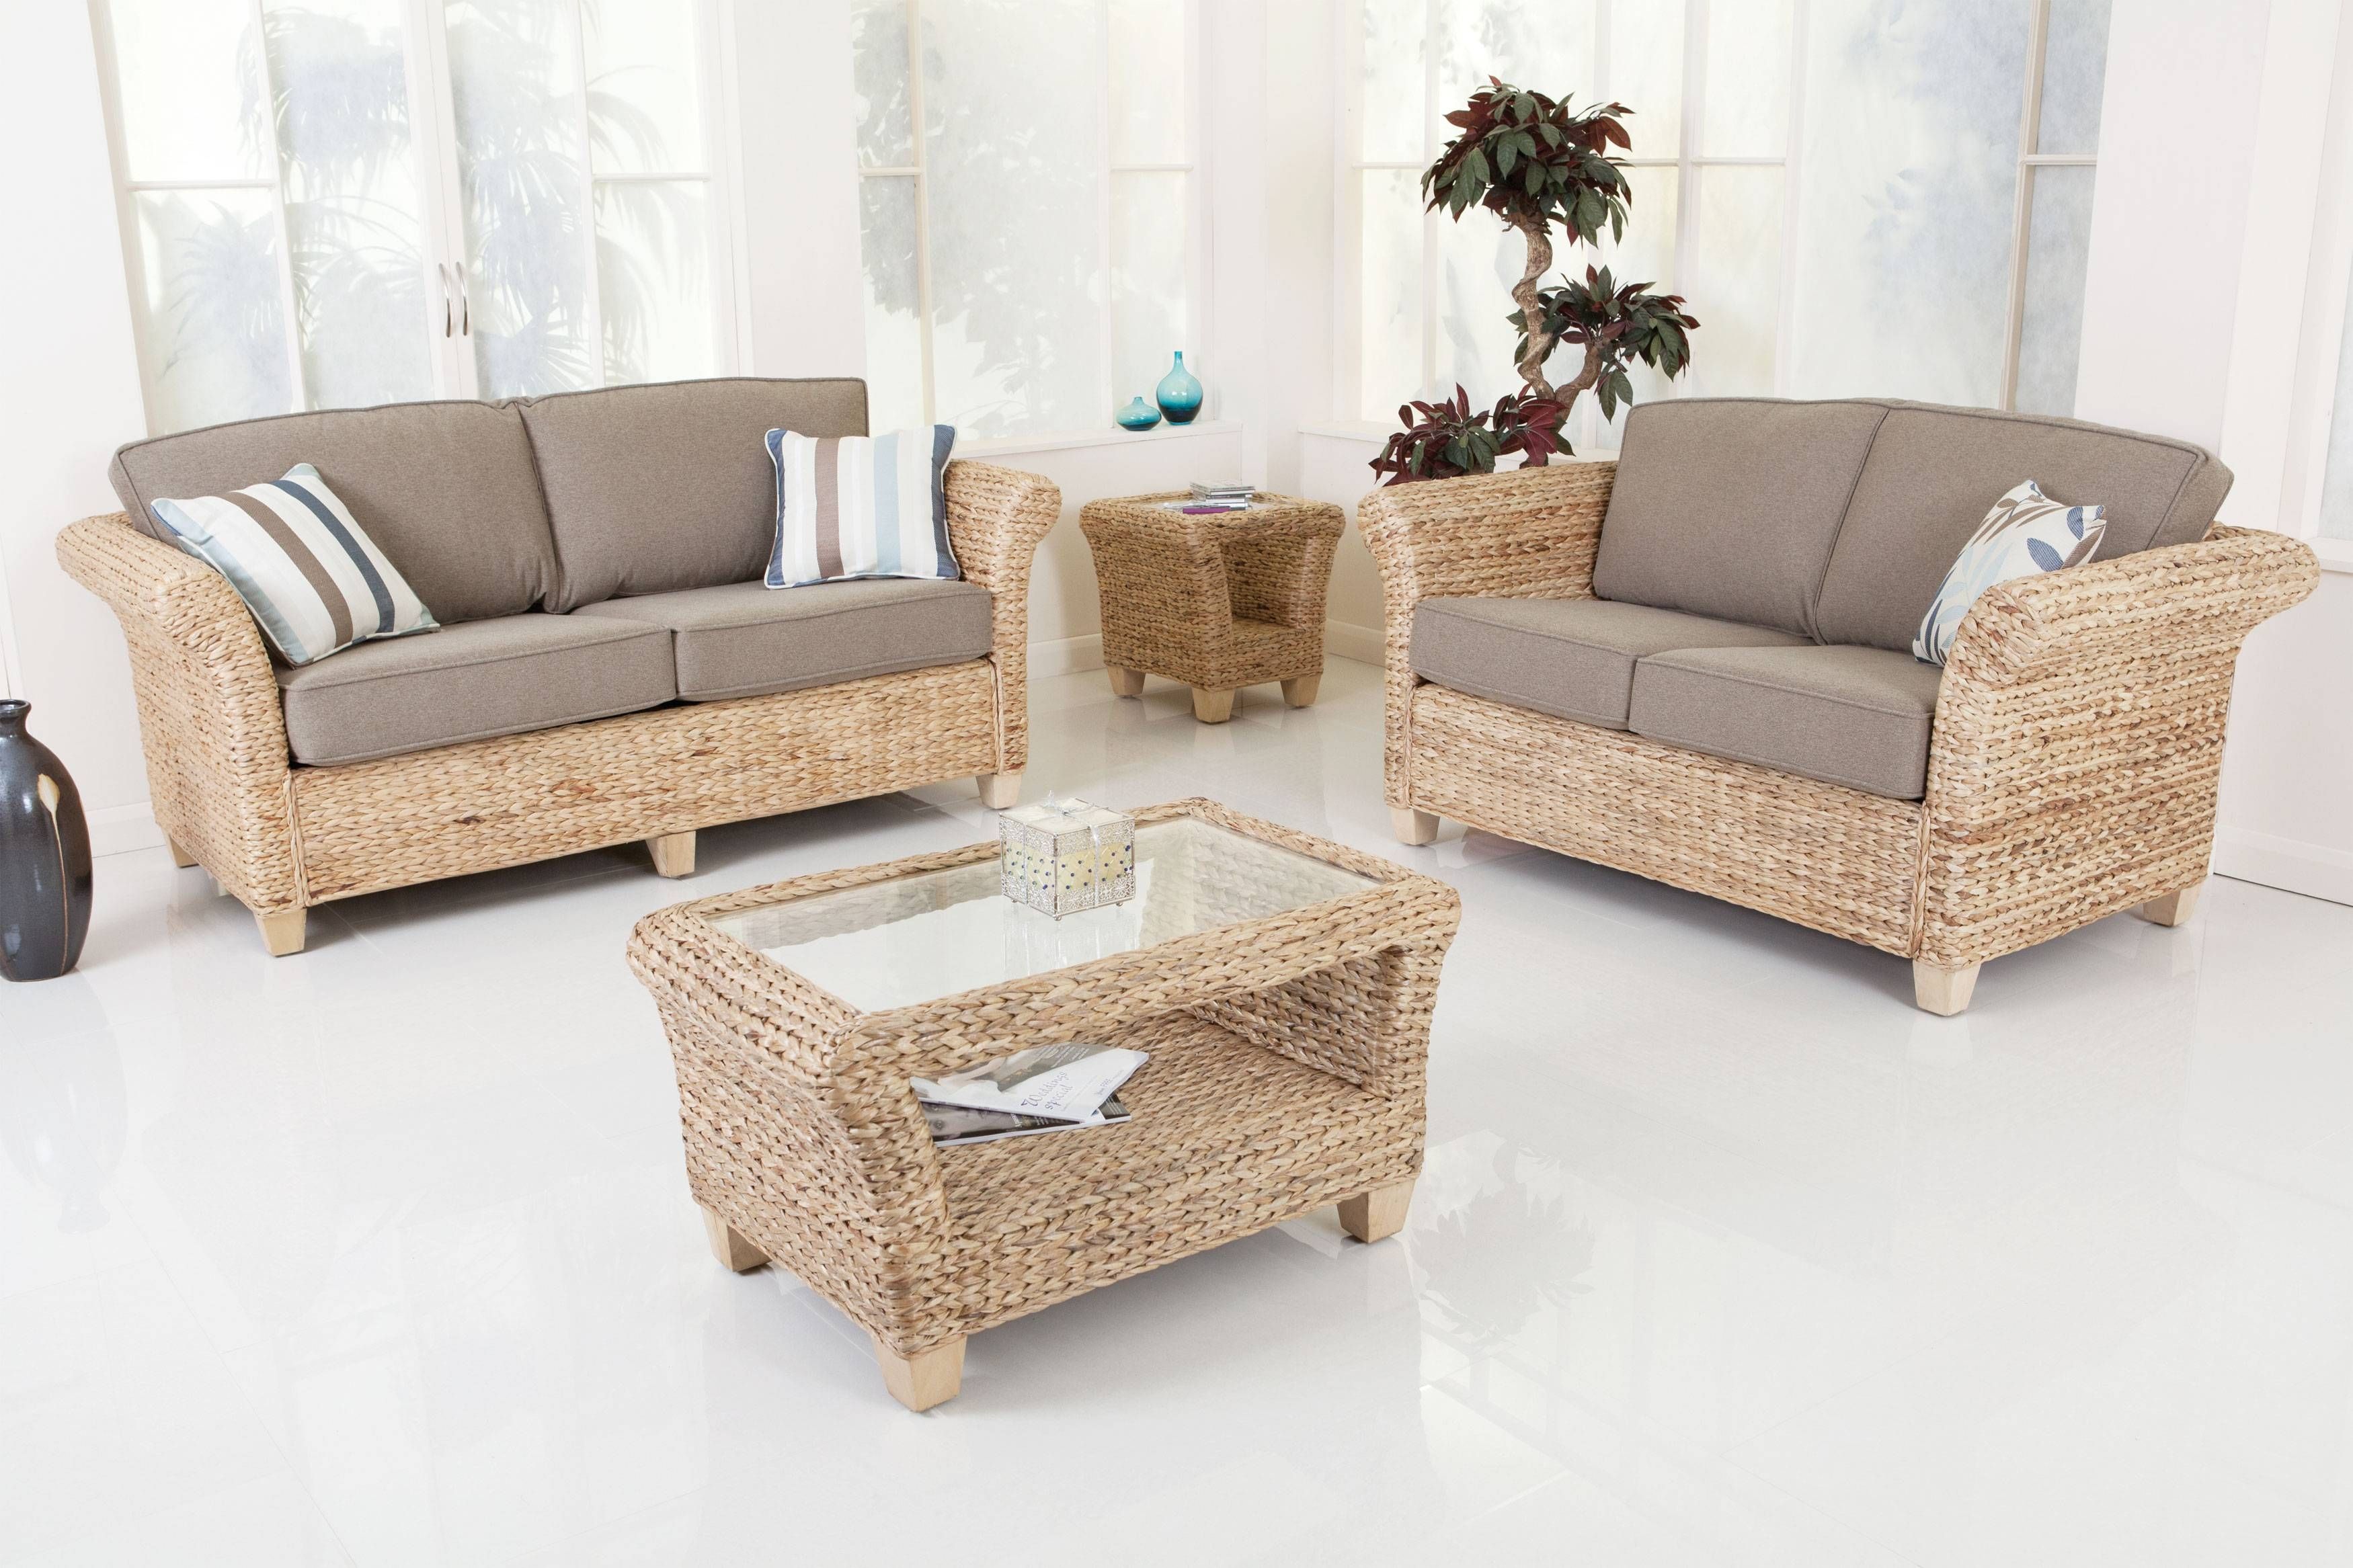 Welcome To Nature Cane And Wood Furniture Works | Cane Furniture Regarding Cane Sofas (View 1 of 15)